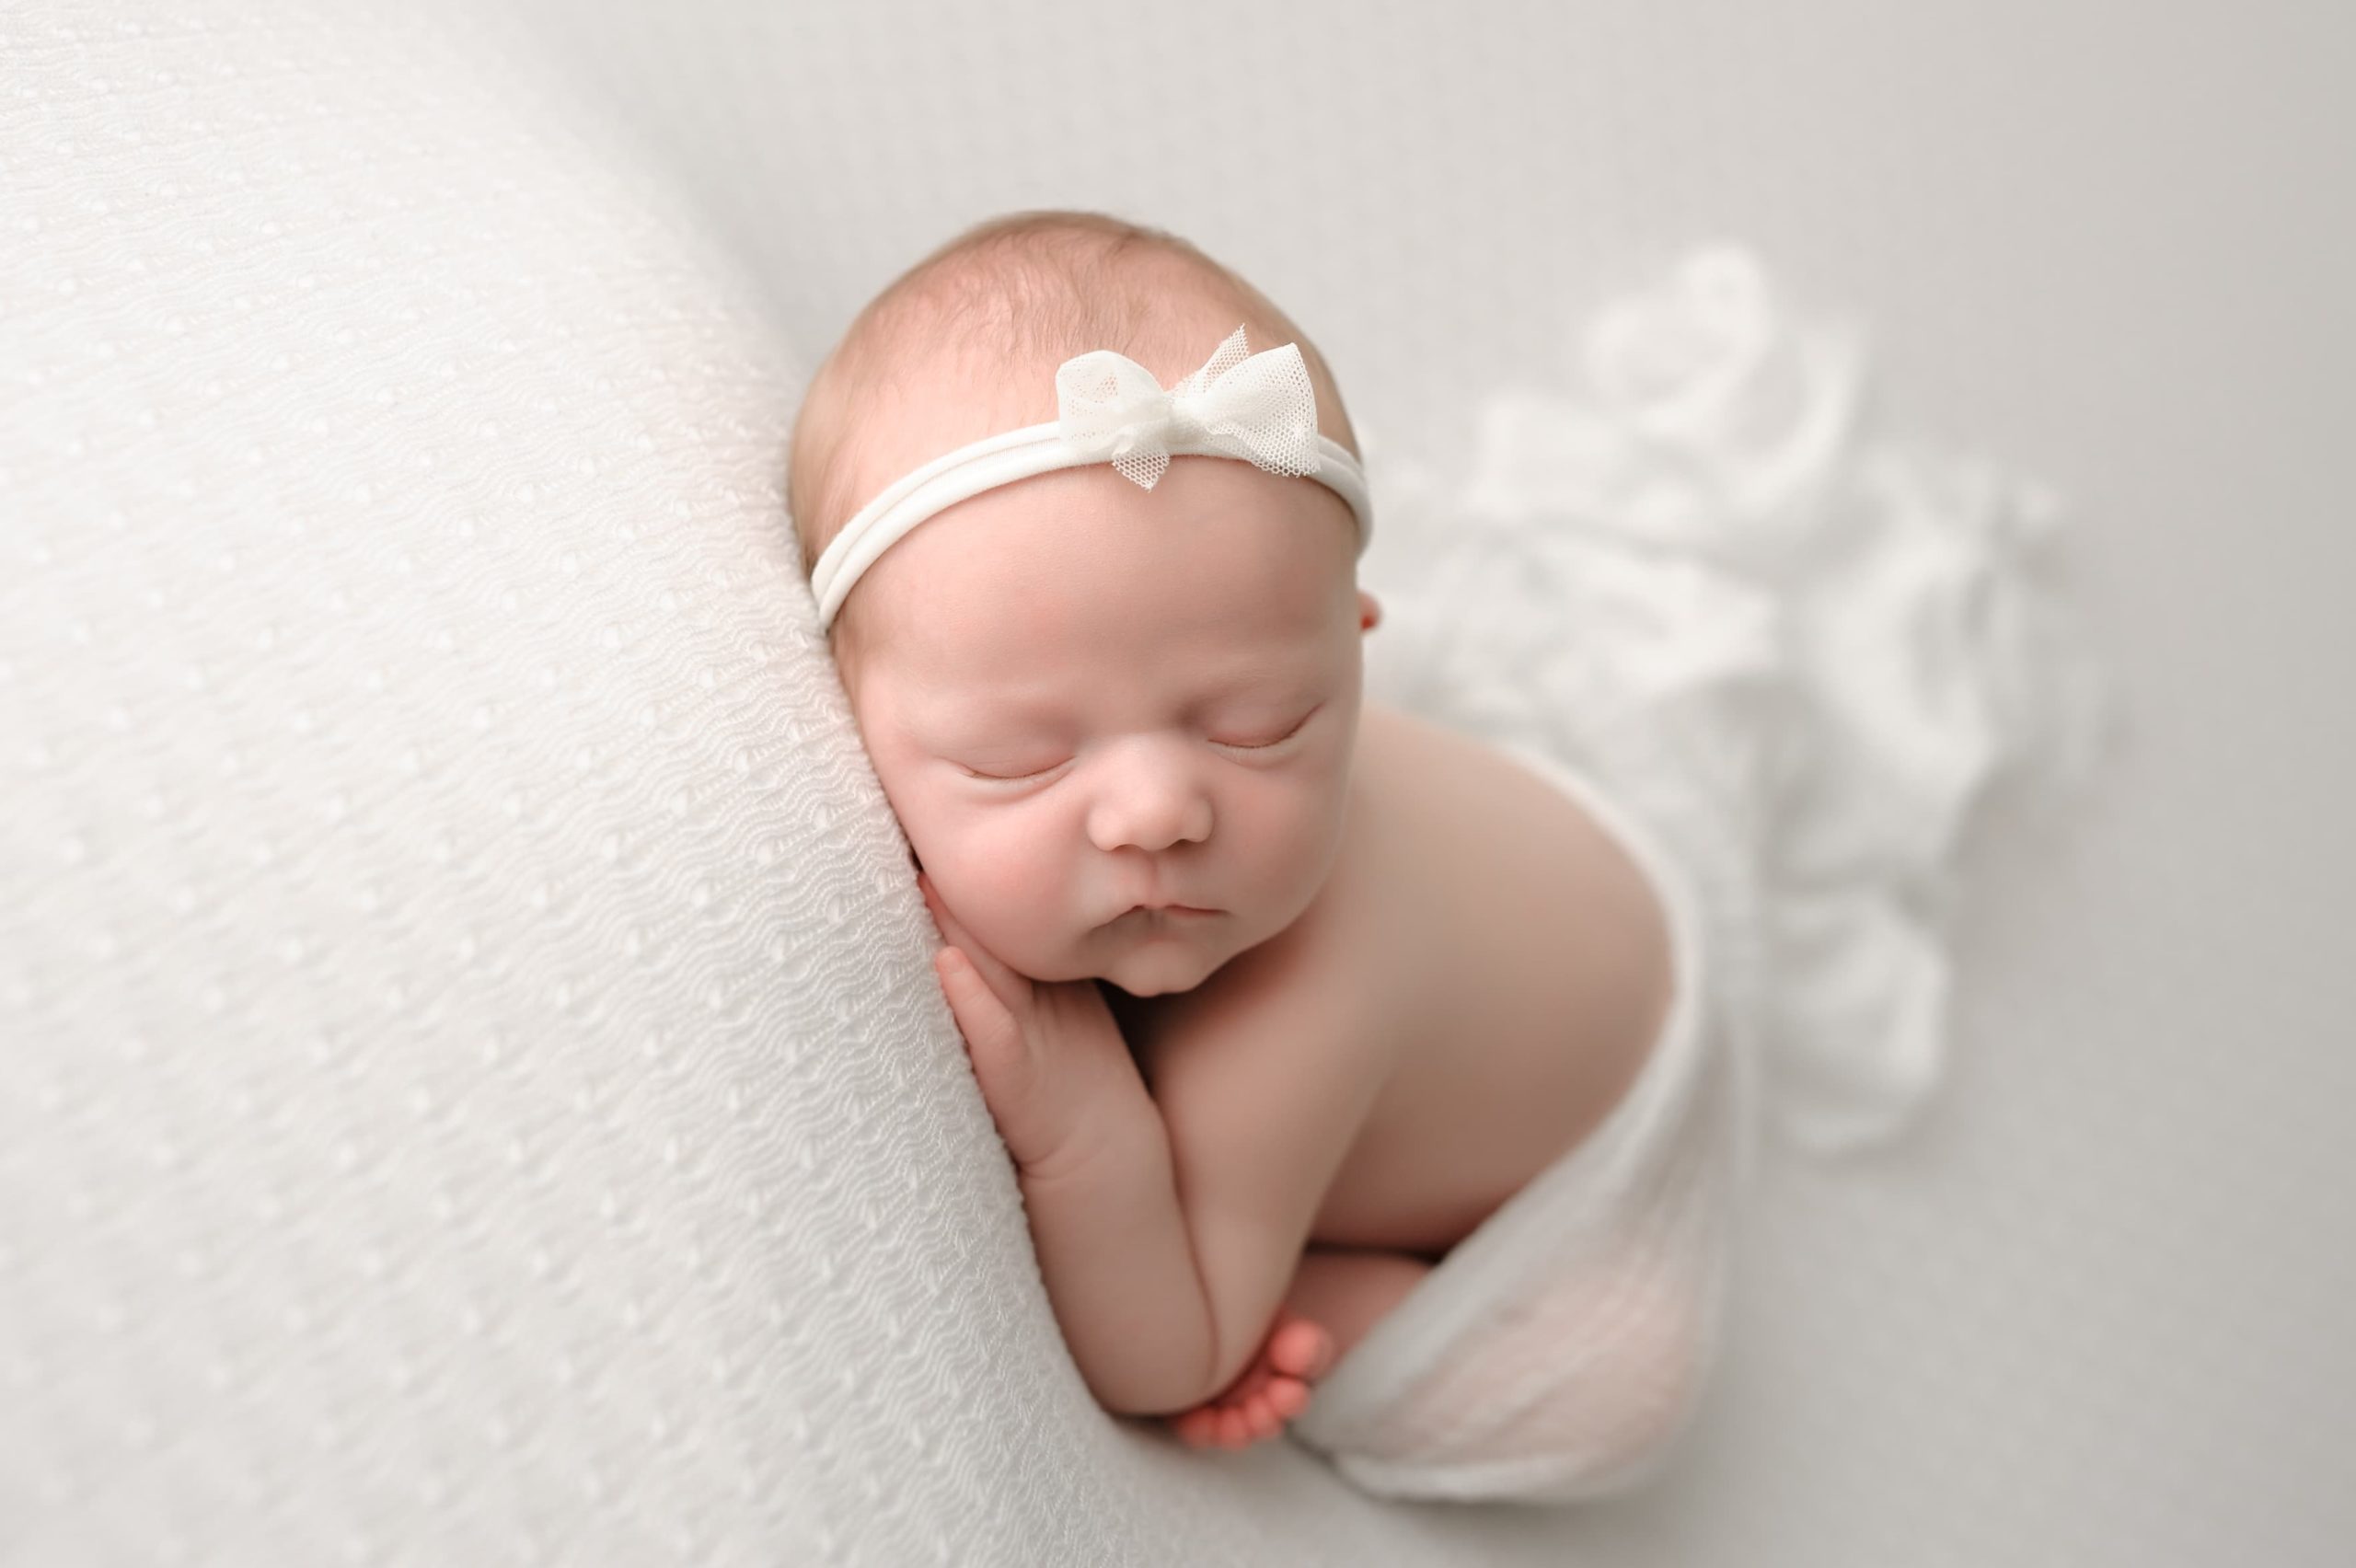 Newborn photo with baby sleeping on its arms while wearing a headband